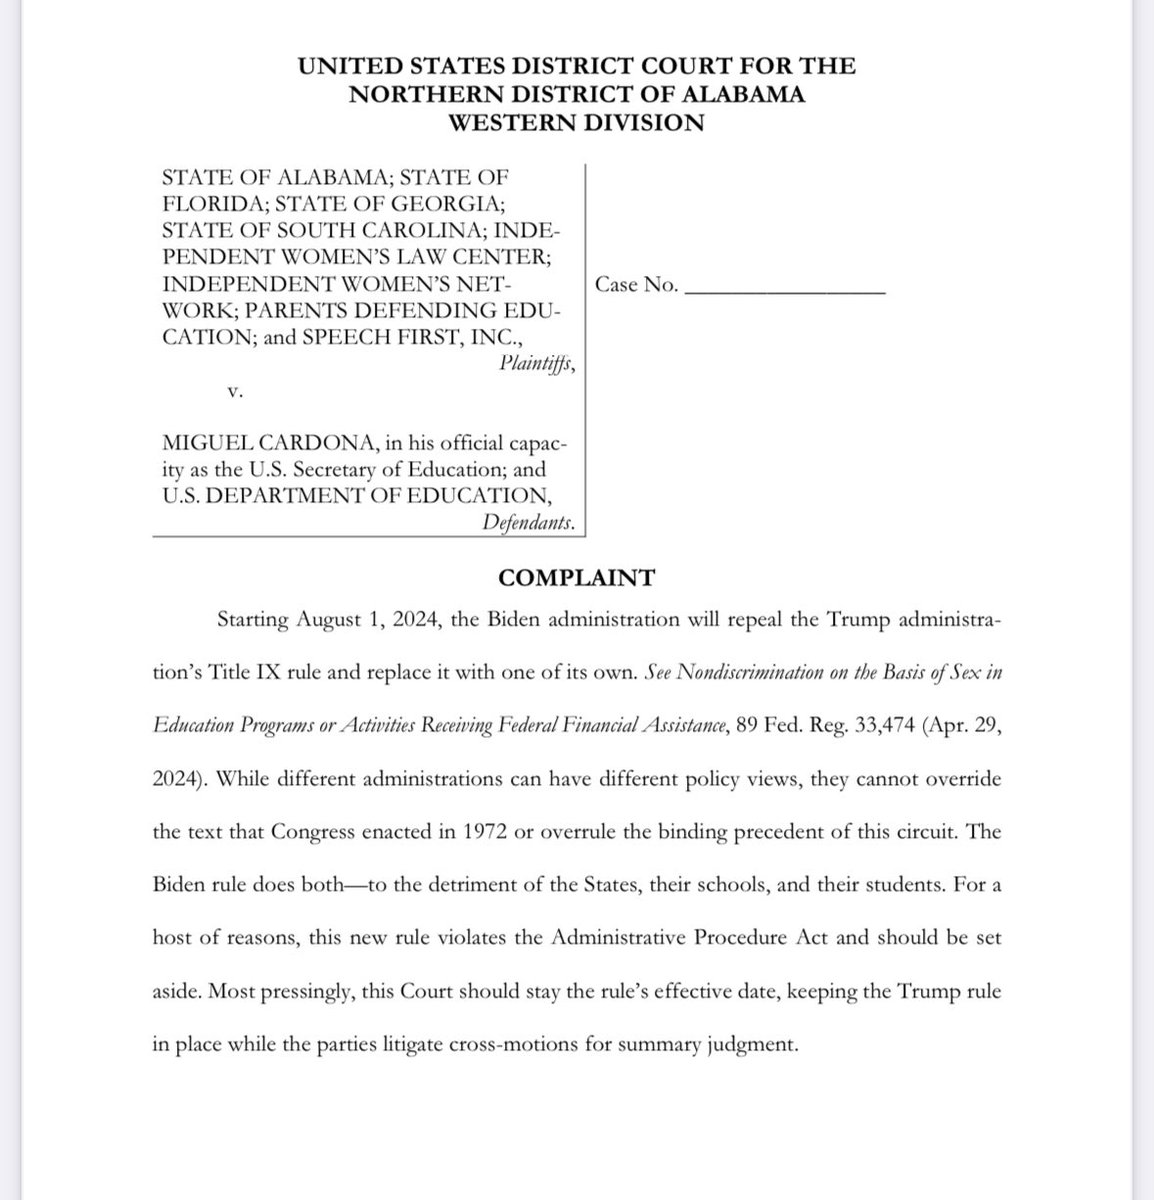 🚨BREAKING: @DefendingEd, @IWF, @Speech_First, and the states of Alabama, Georgia, Florida, and South Carolina just filed a landmark lawsuit against the Biden Administration over their illegal Title IX rewrite. The role of Cabinet agencies is to interpret laws as written by